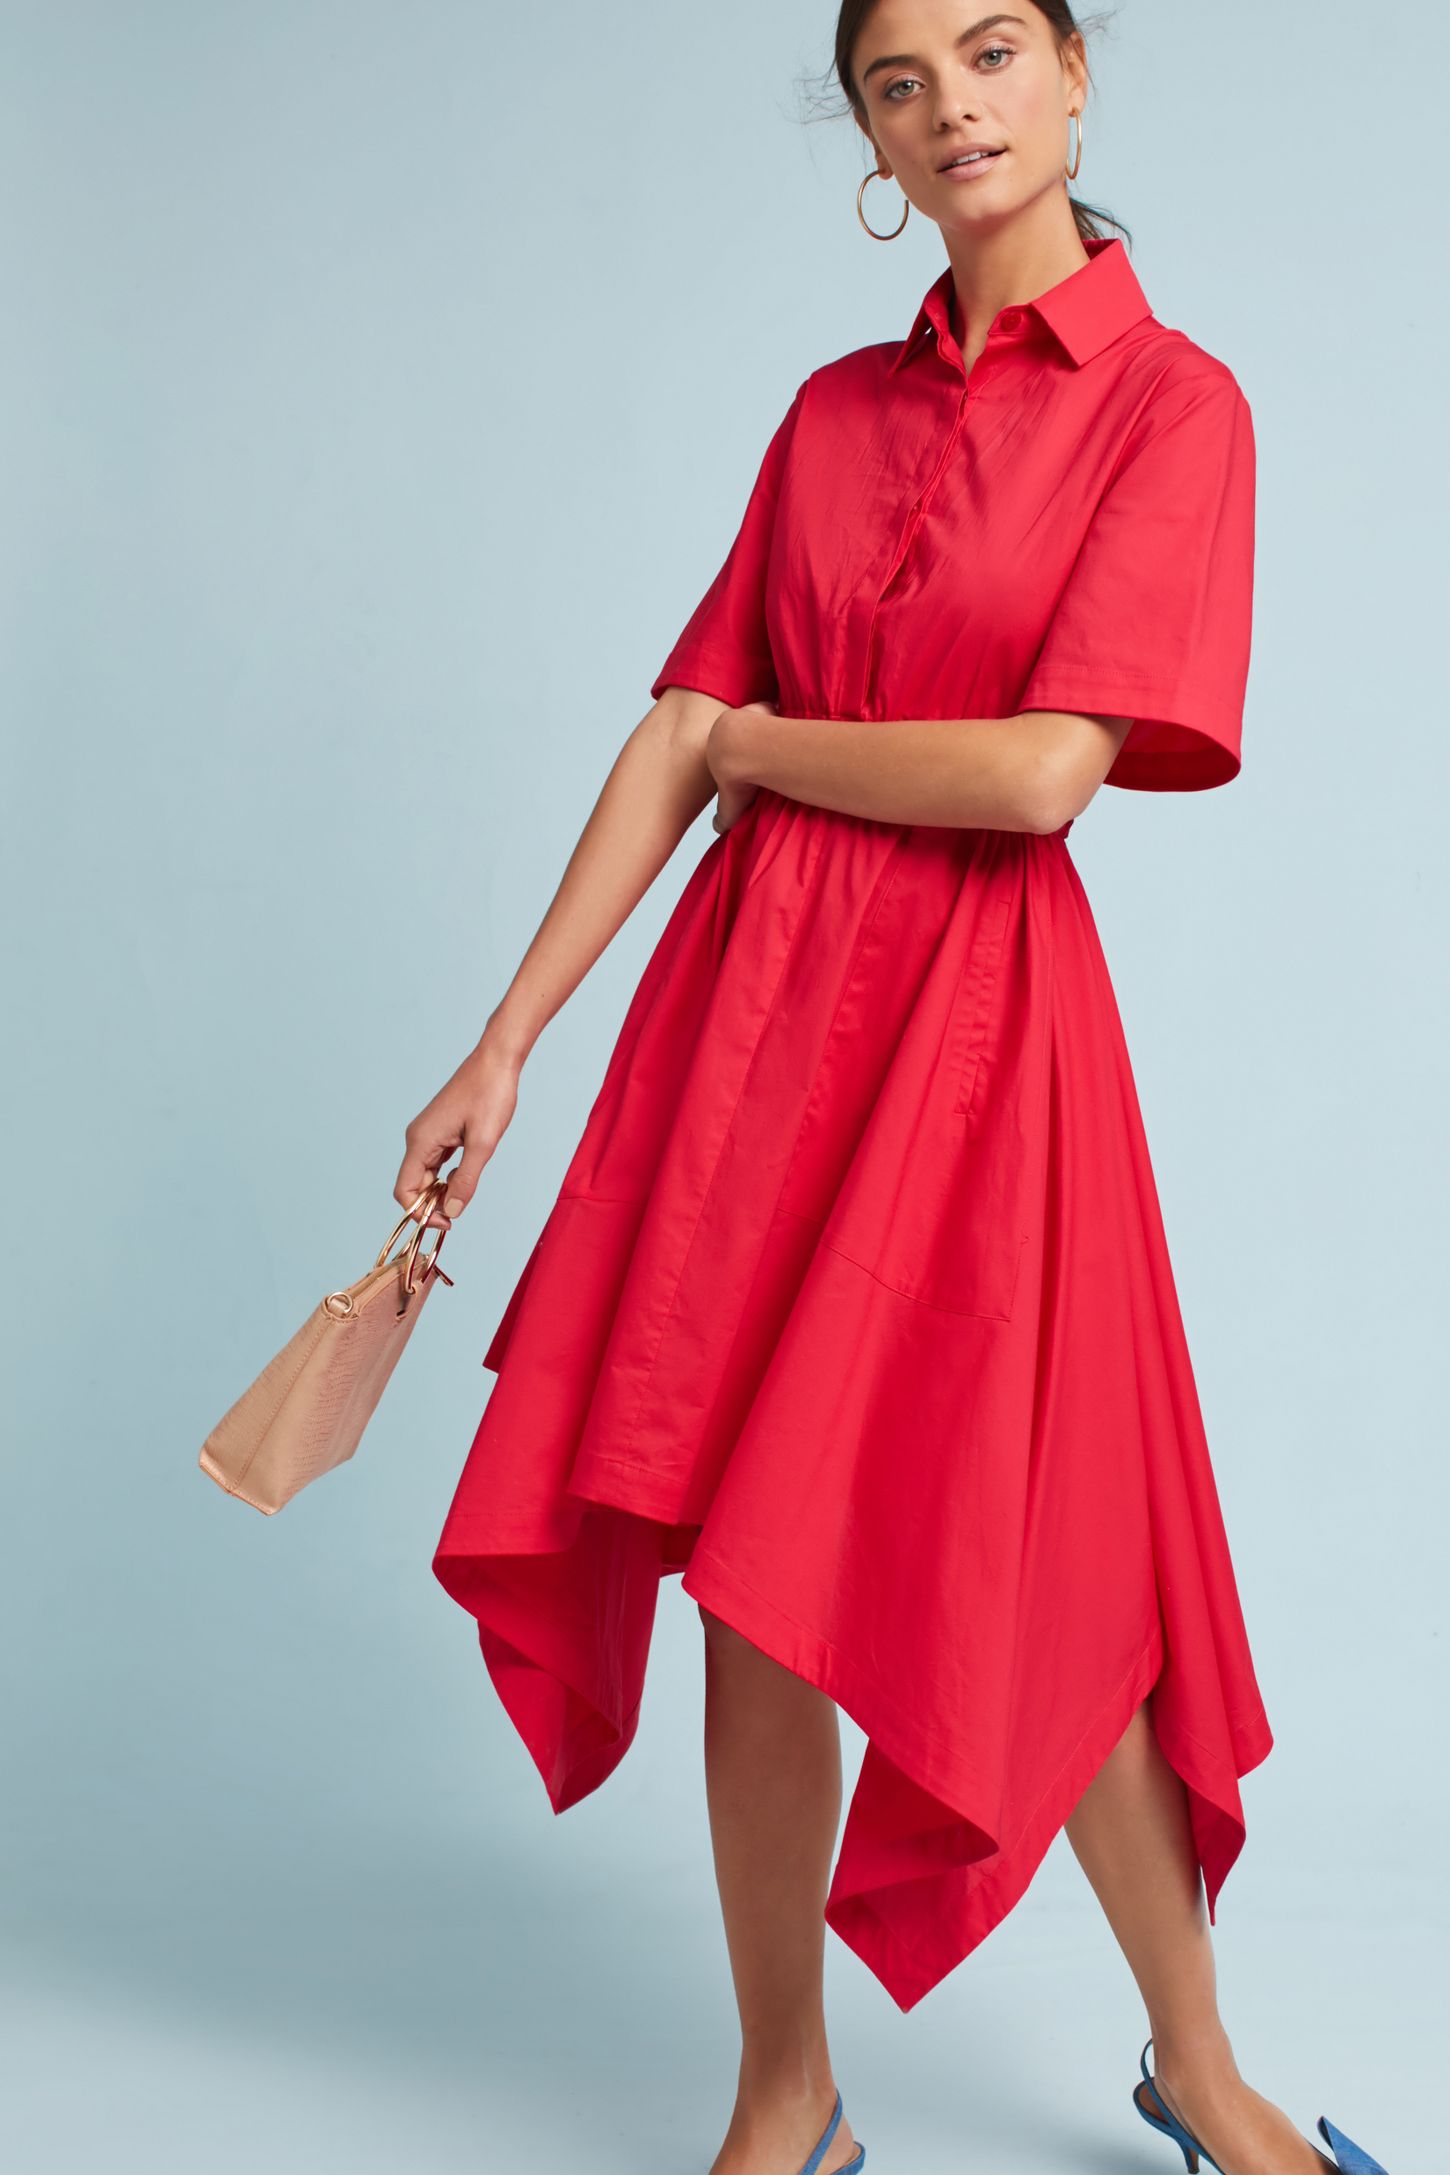 White dresses, blue shoes and red accessories | Recruitment outfits,  Outfits, Red accessories